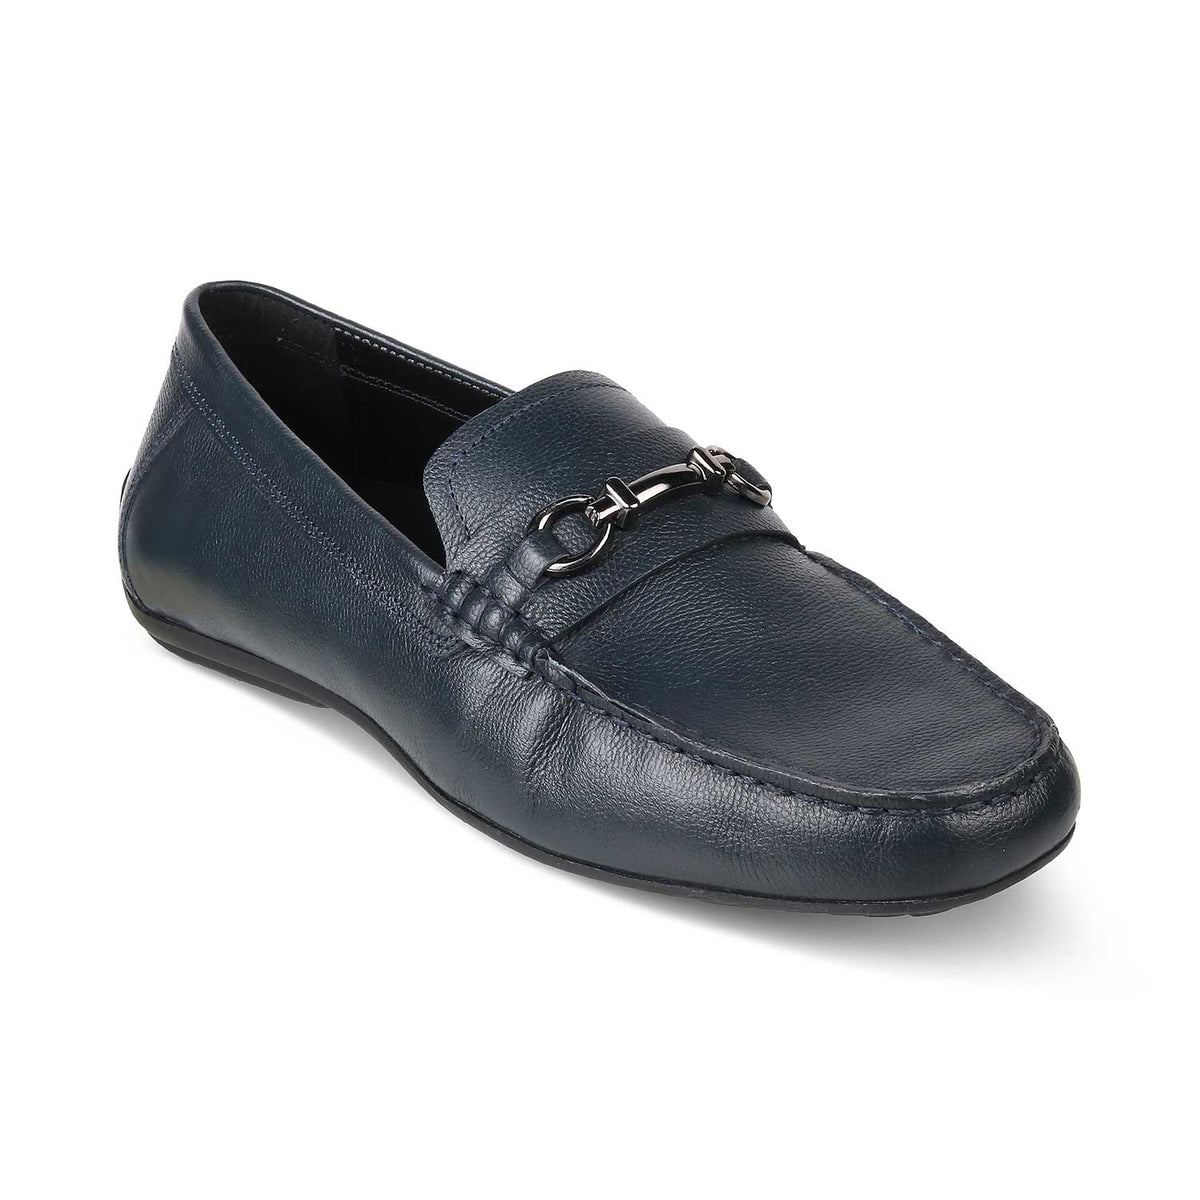 The Sandee Blue Men's Leather Driving Loafers Tresmode - Tresmode